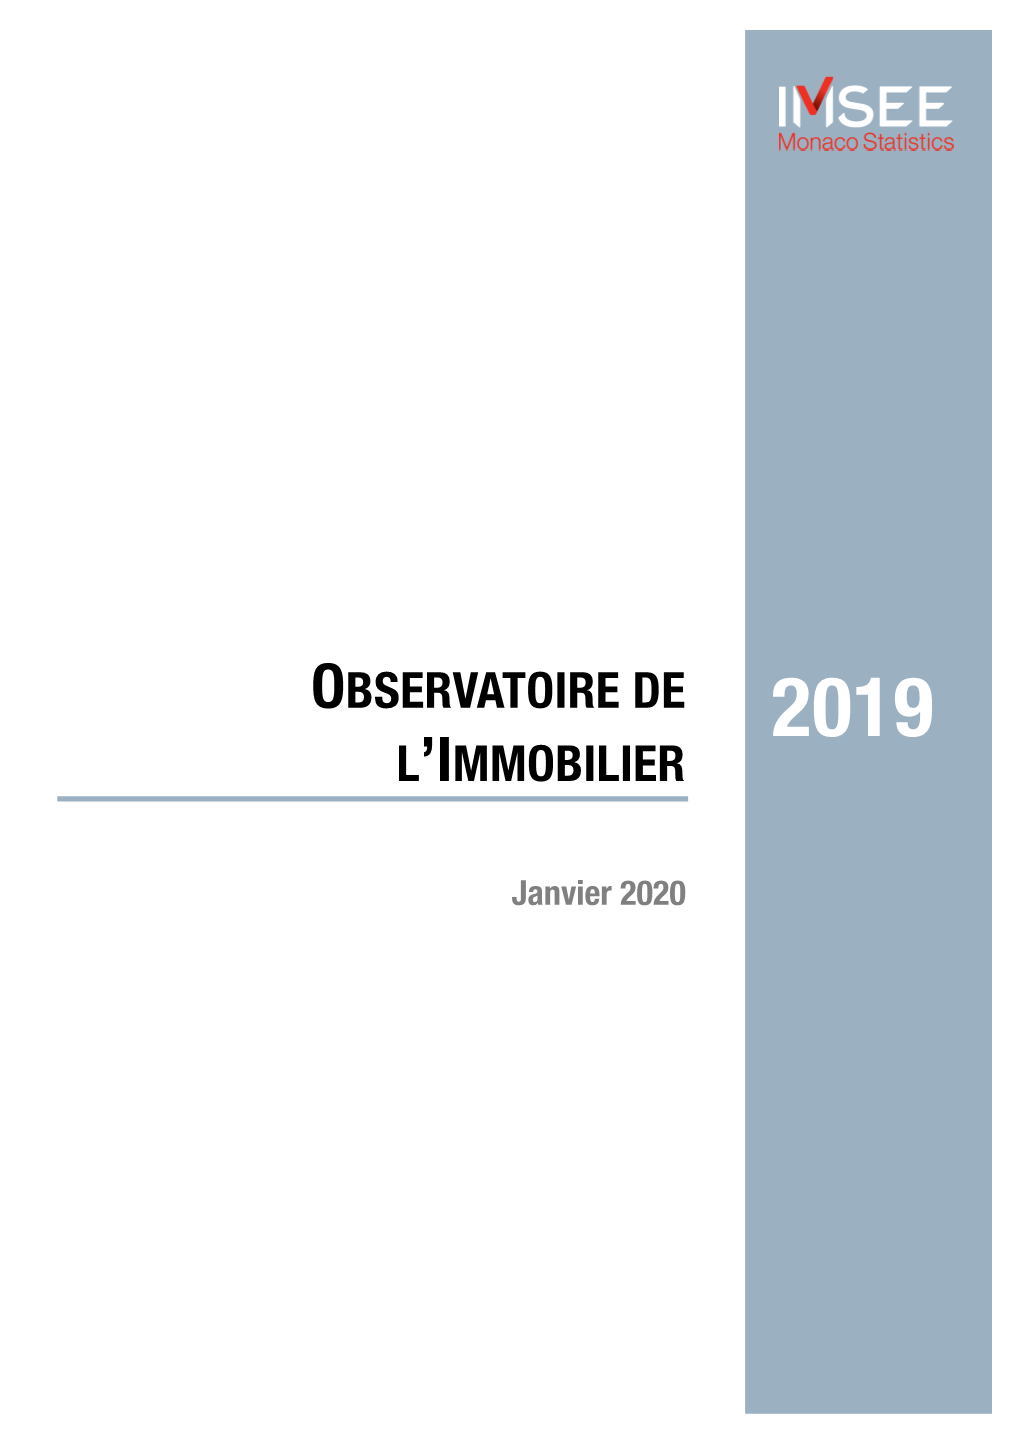 L'observatoire Immobilier 2019